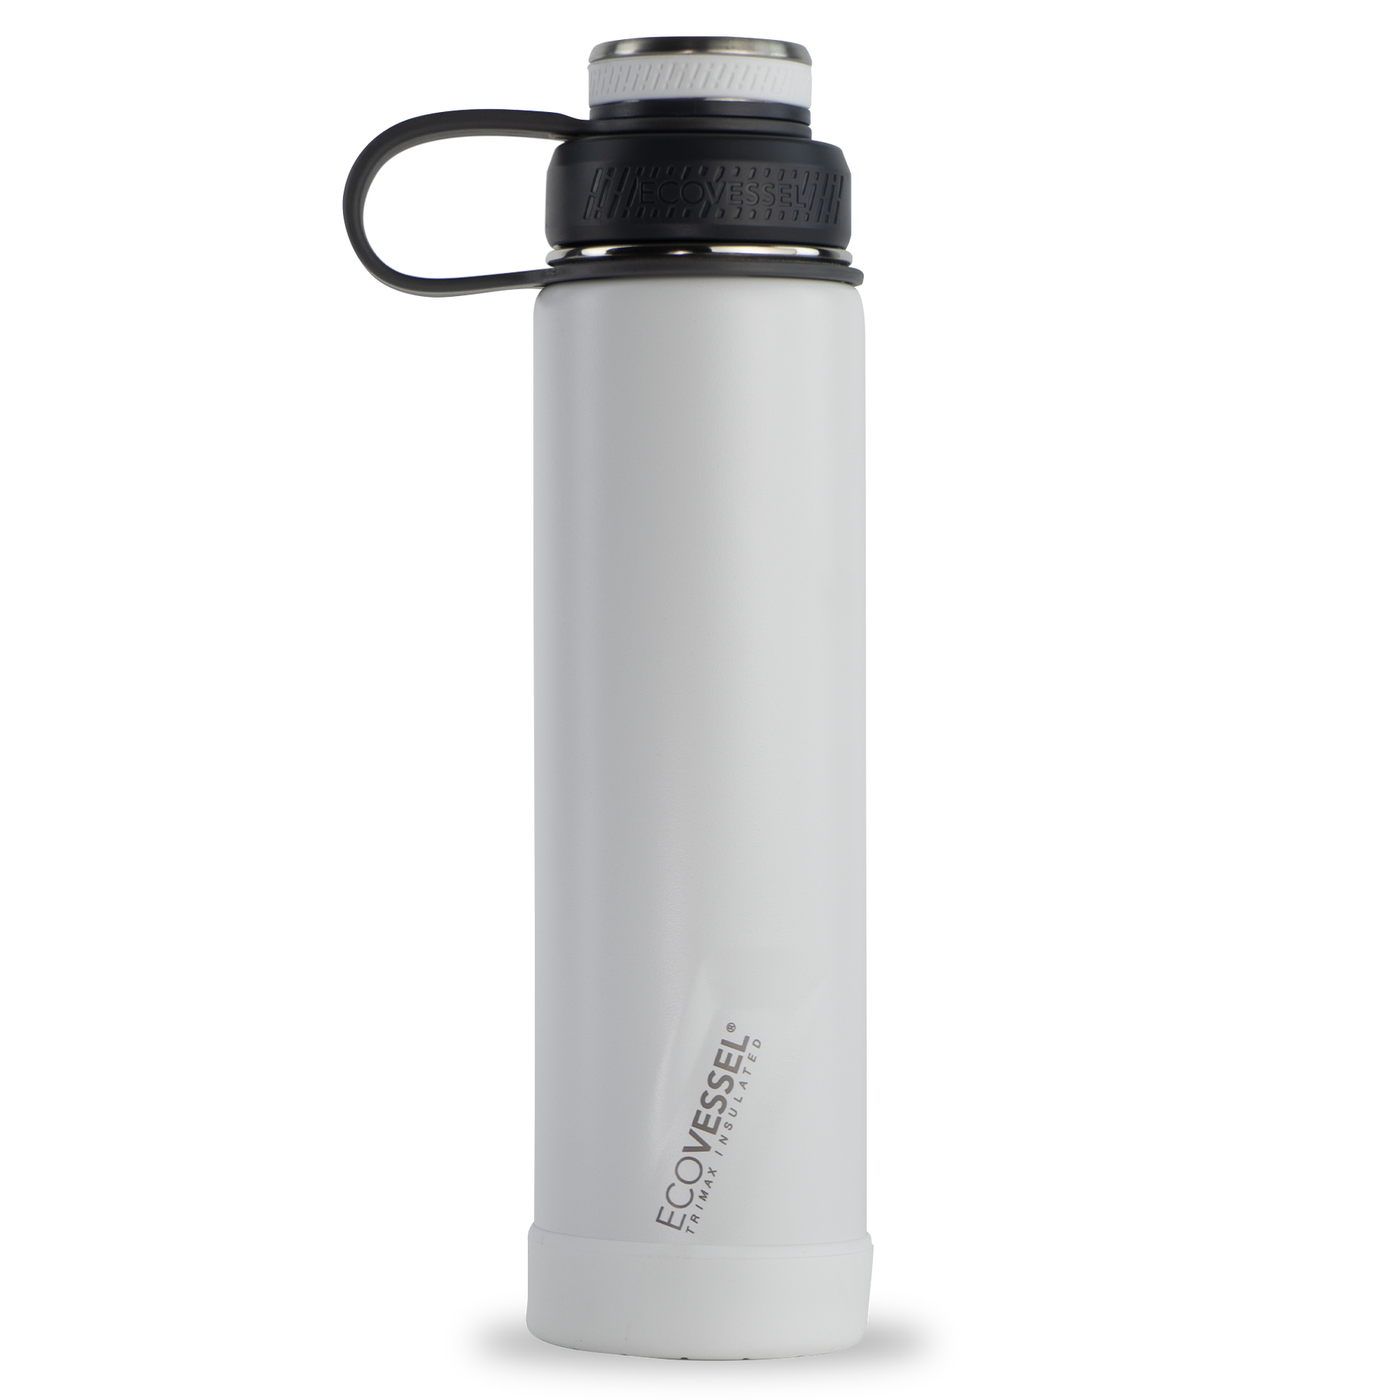 Boulder 24oz Whiteout Insulated Stainless Steel Bottle